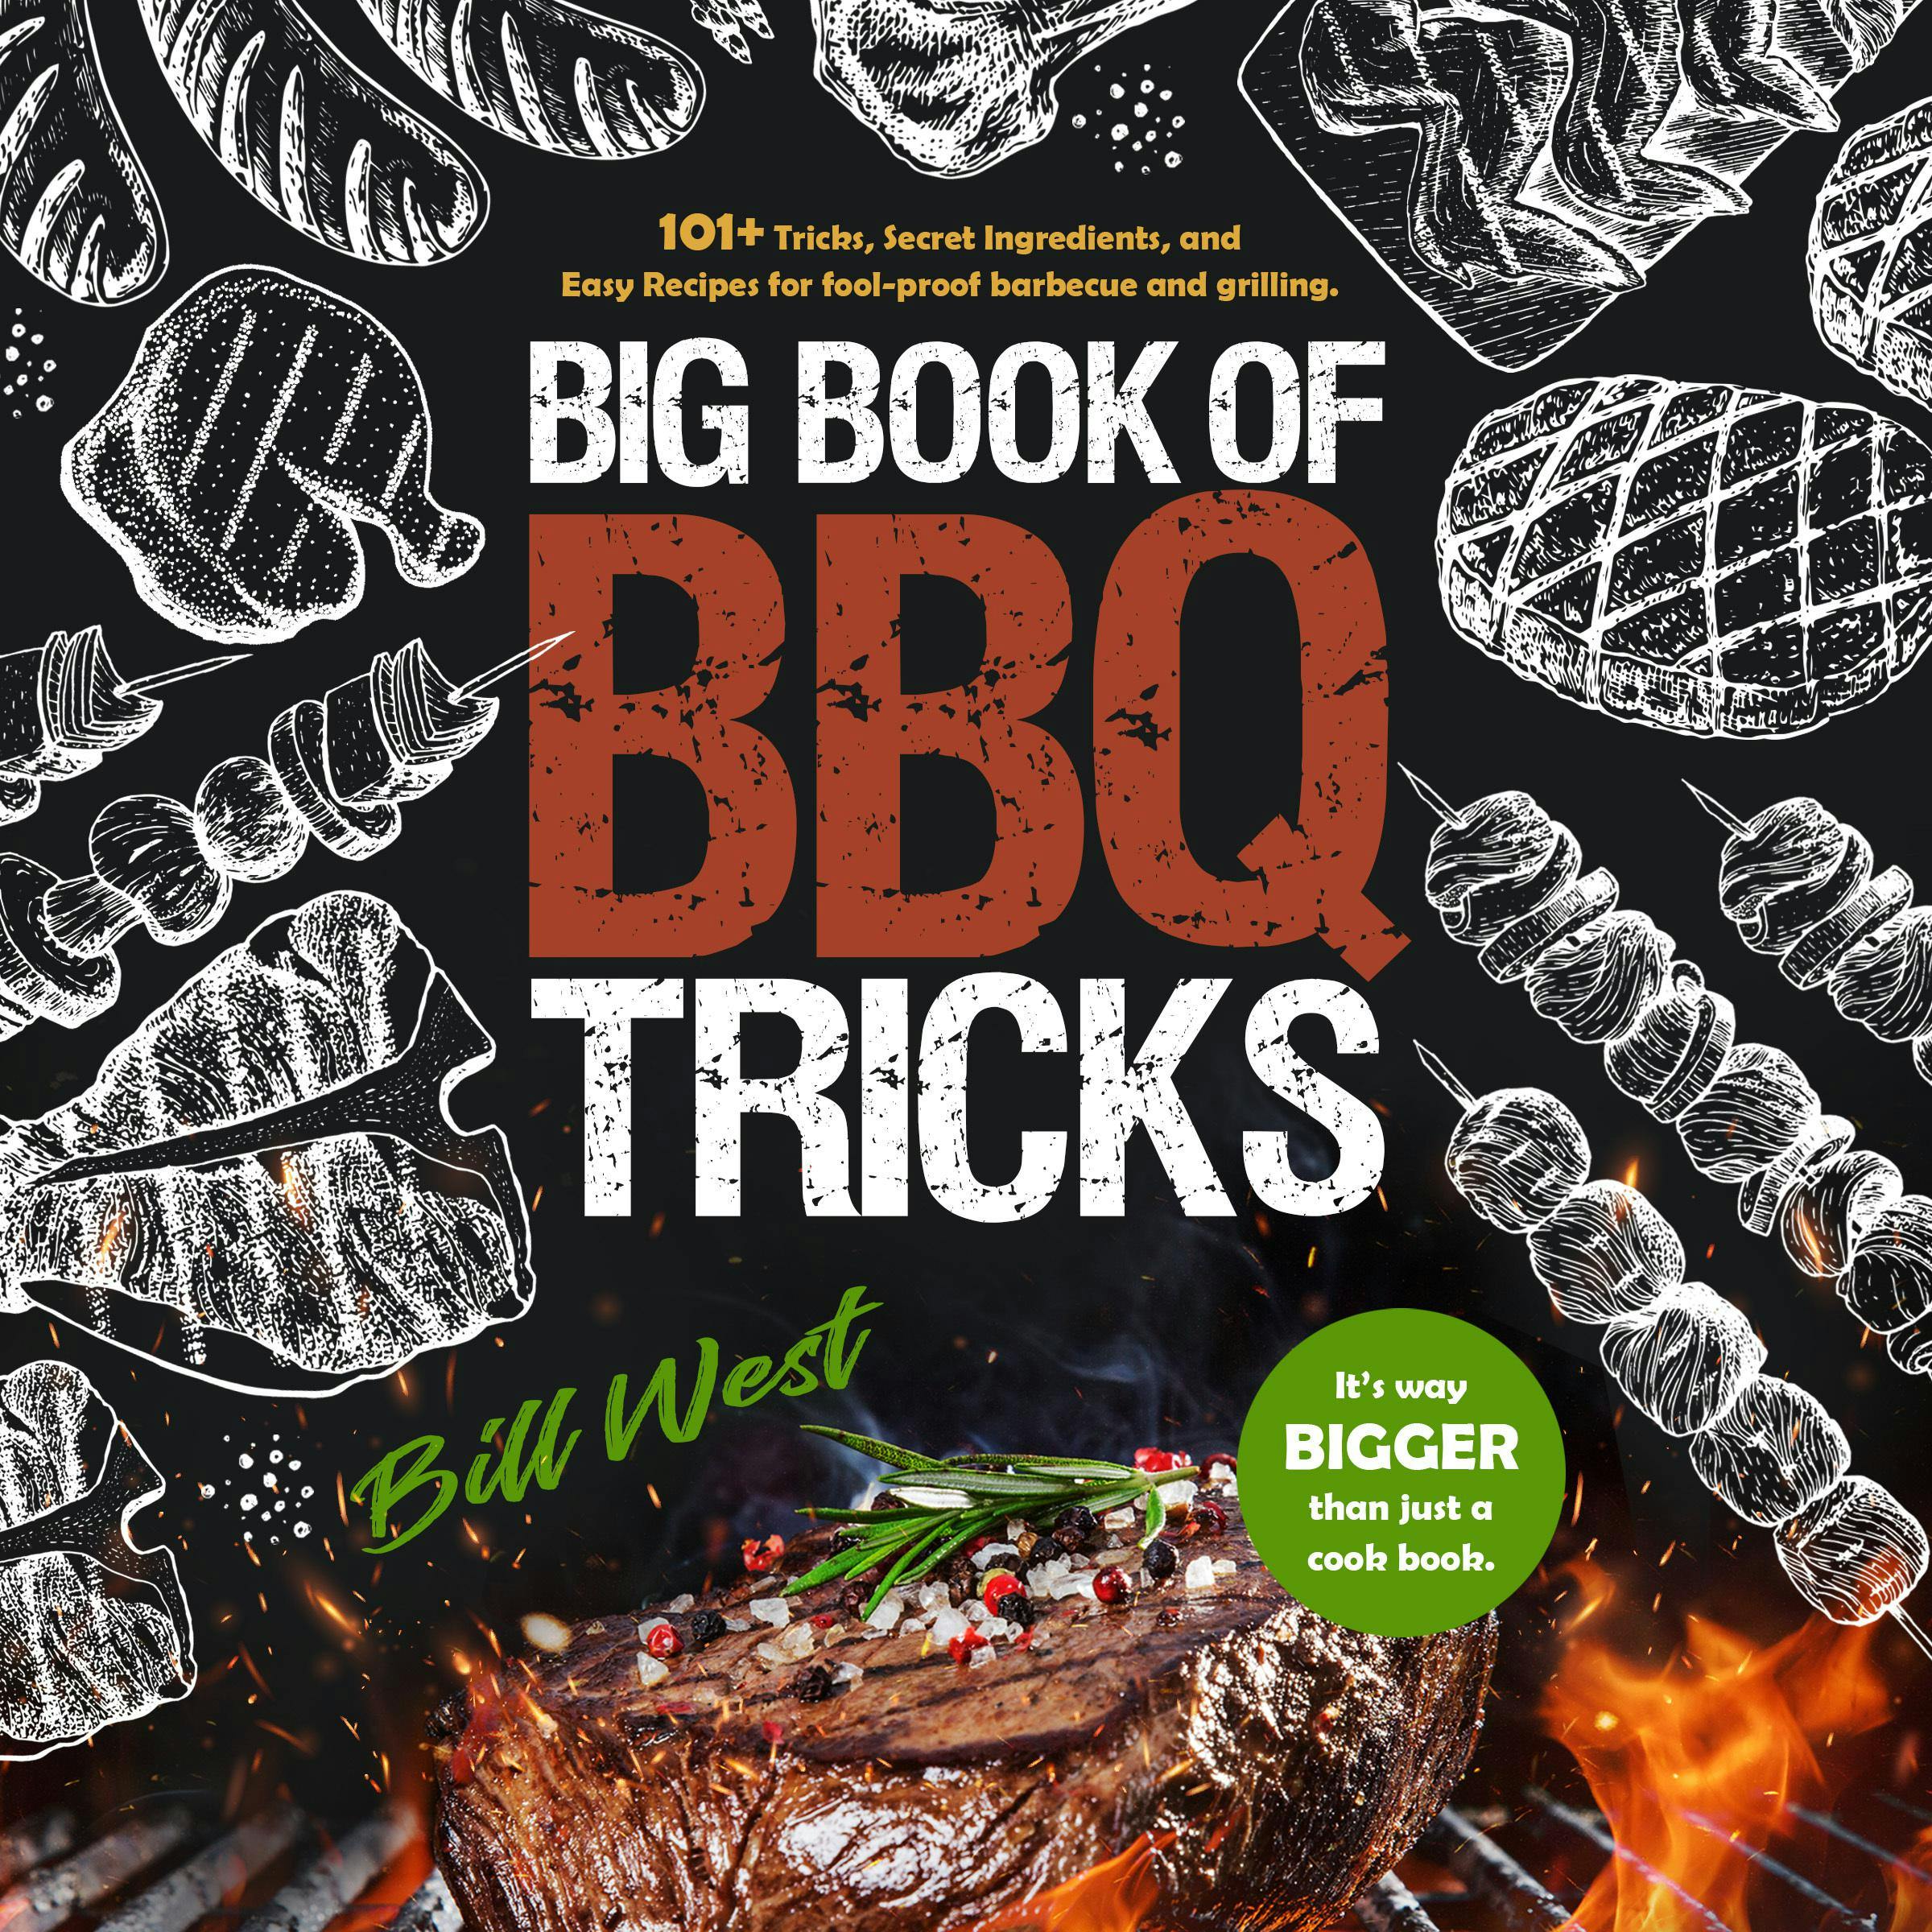 Big Book of BBQ Tricks: 101+ Tricks, Secret Ingredients, and Easy Recipes for Foolproof Barbecue & Grilling - Bill West